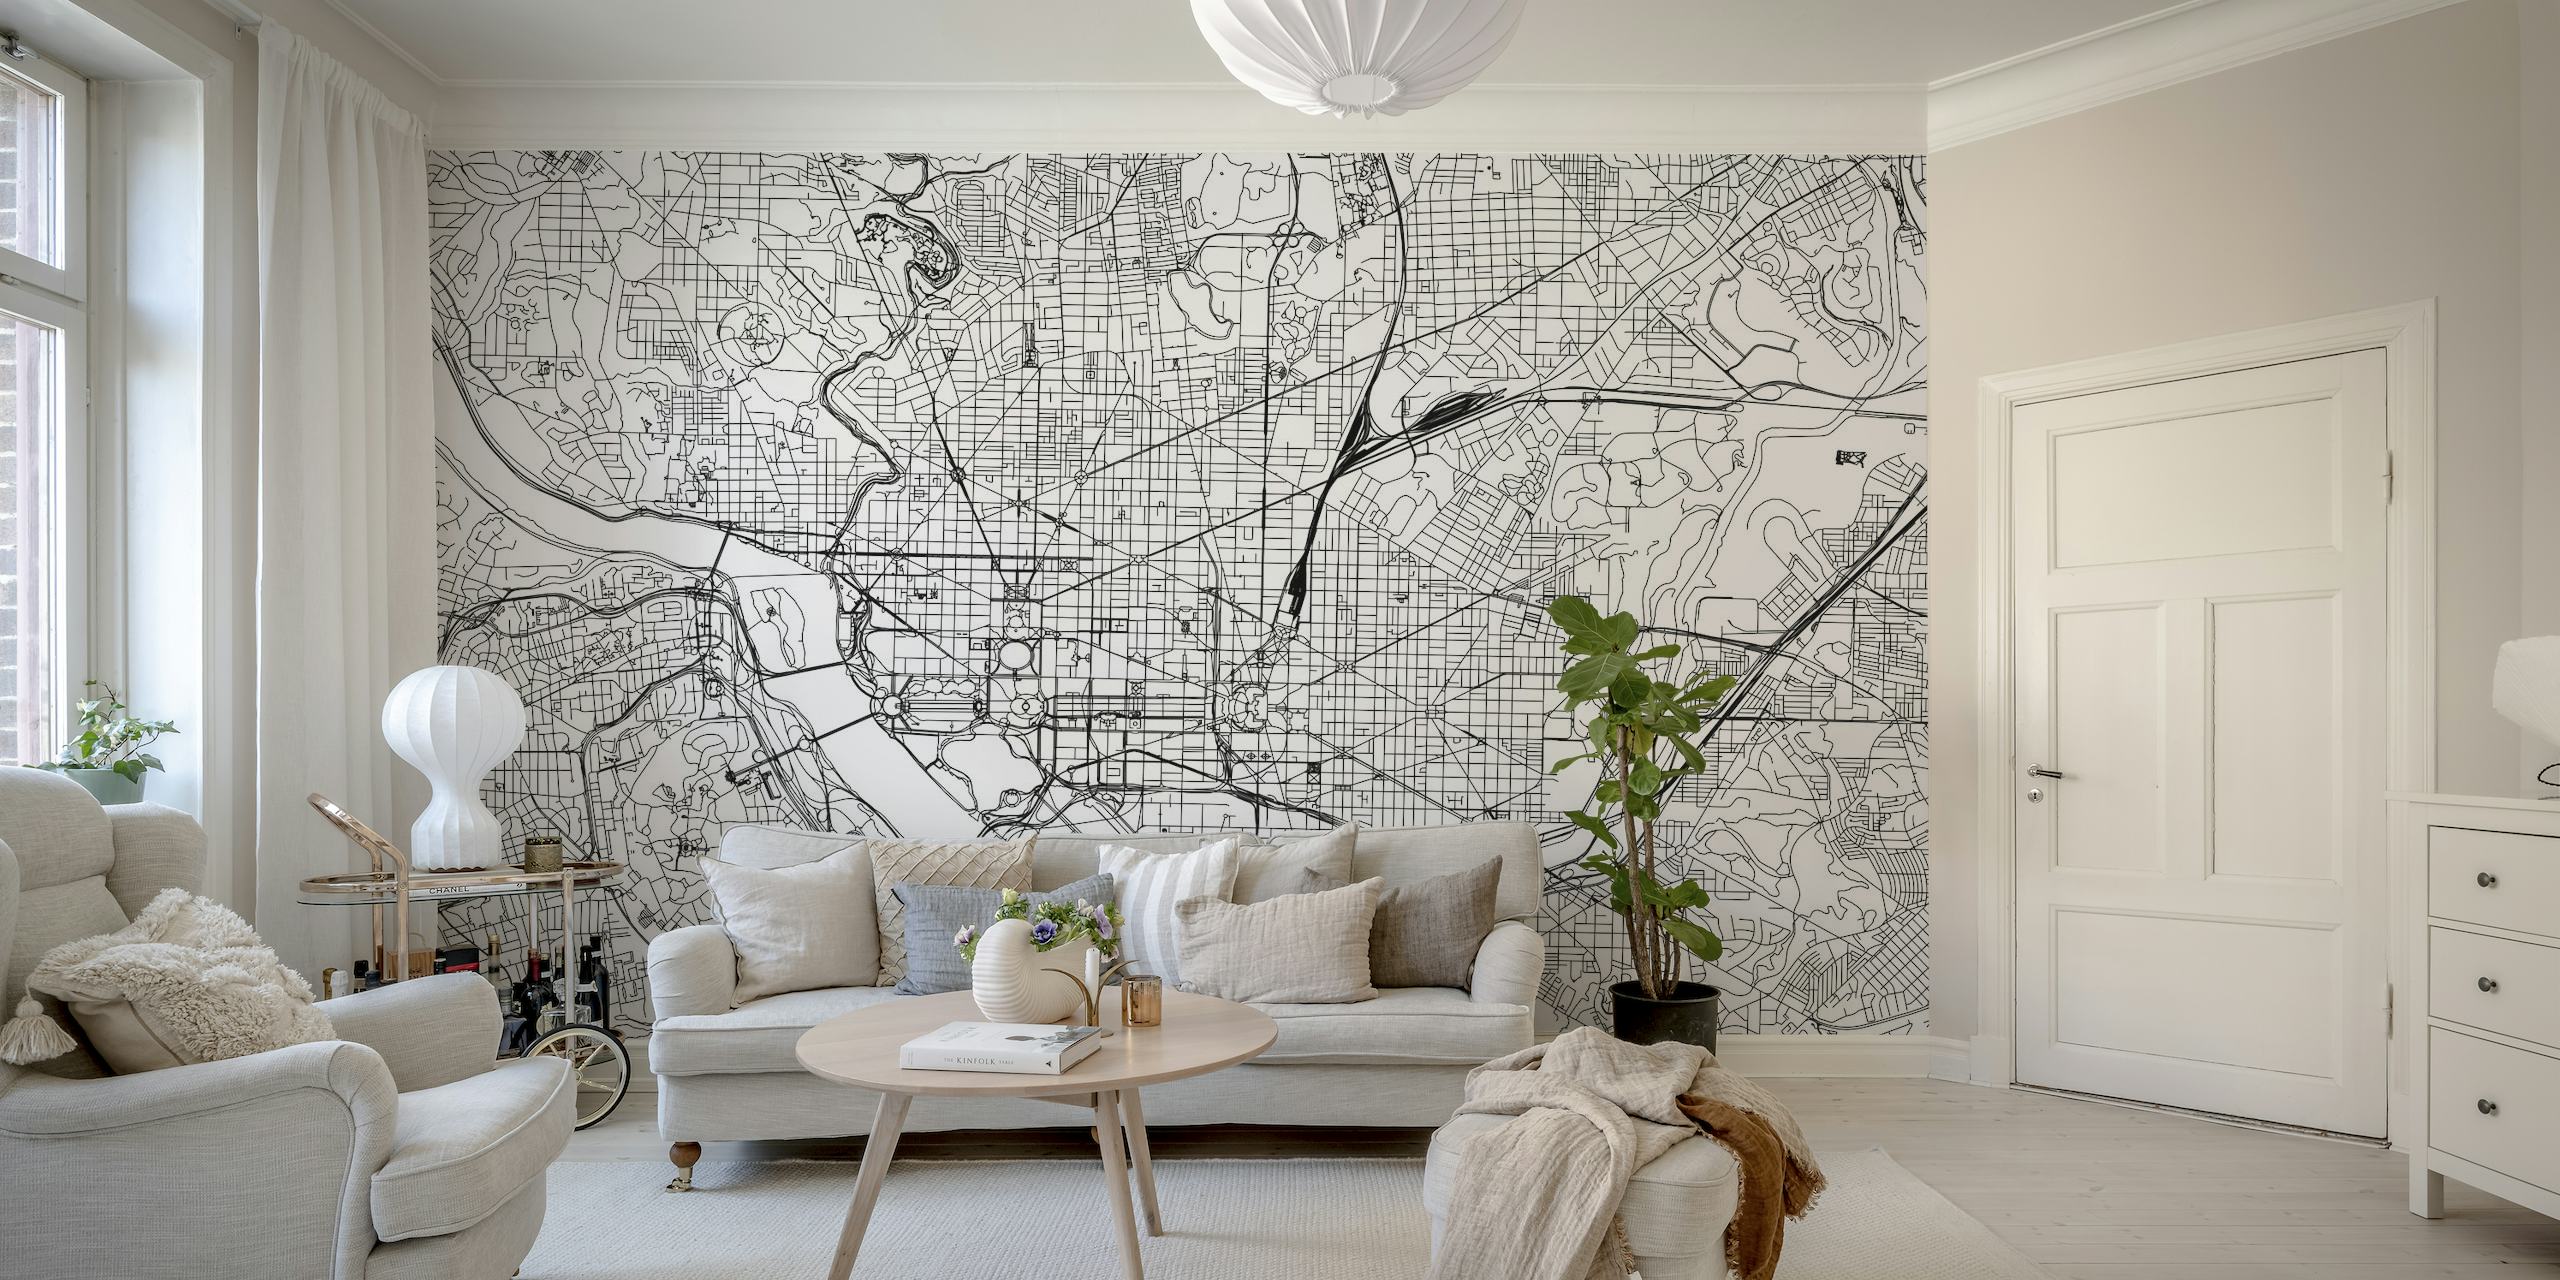 Iconic Washington DC map featured in Happywall wallpaper design